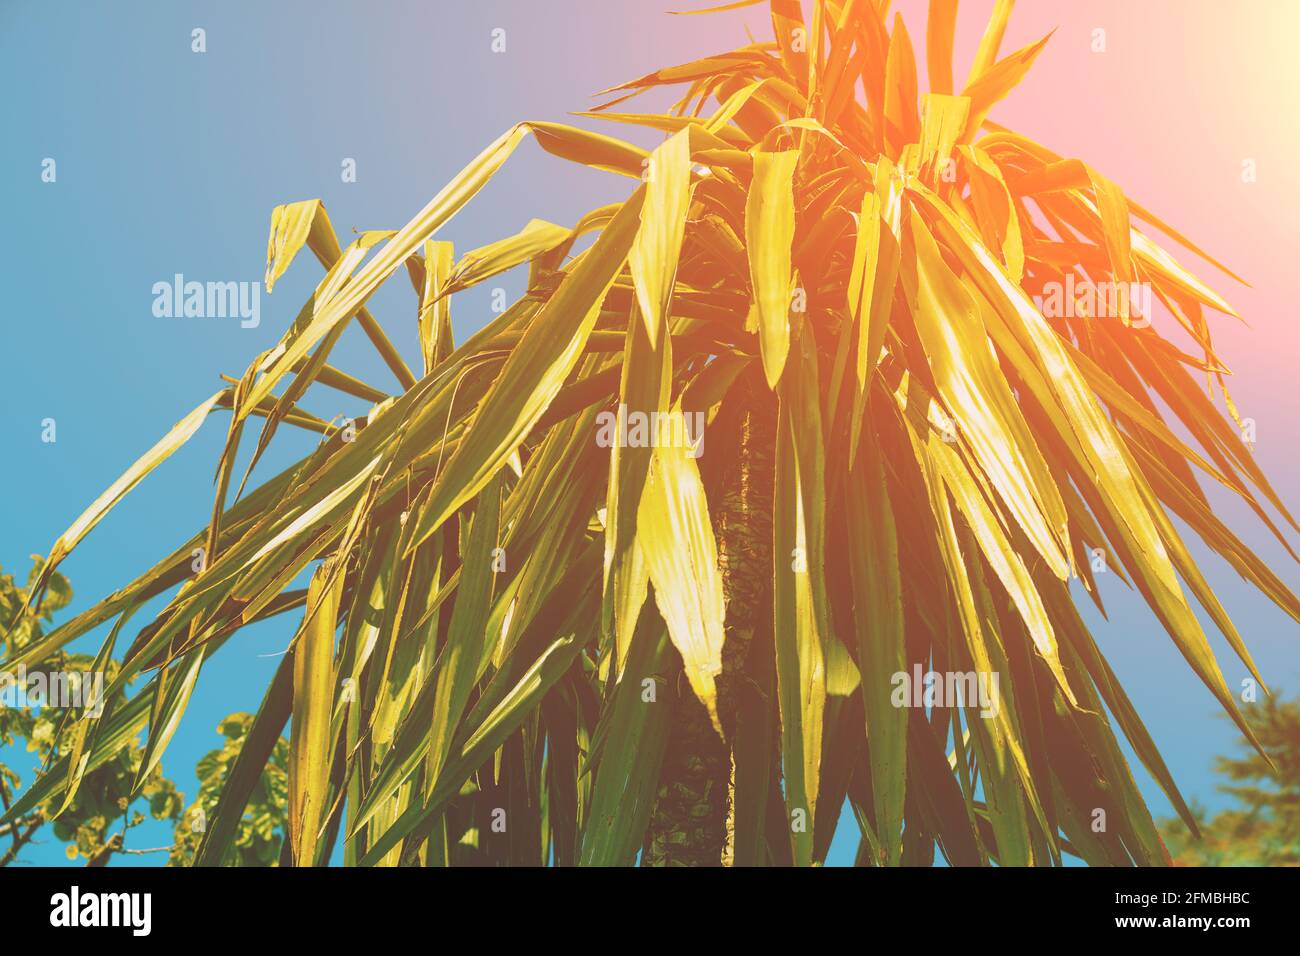 Yucca palm against a blue sky Stock Photo